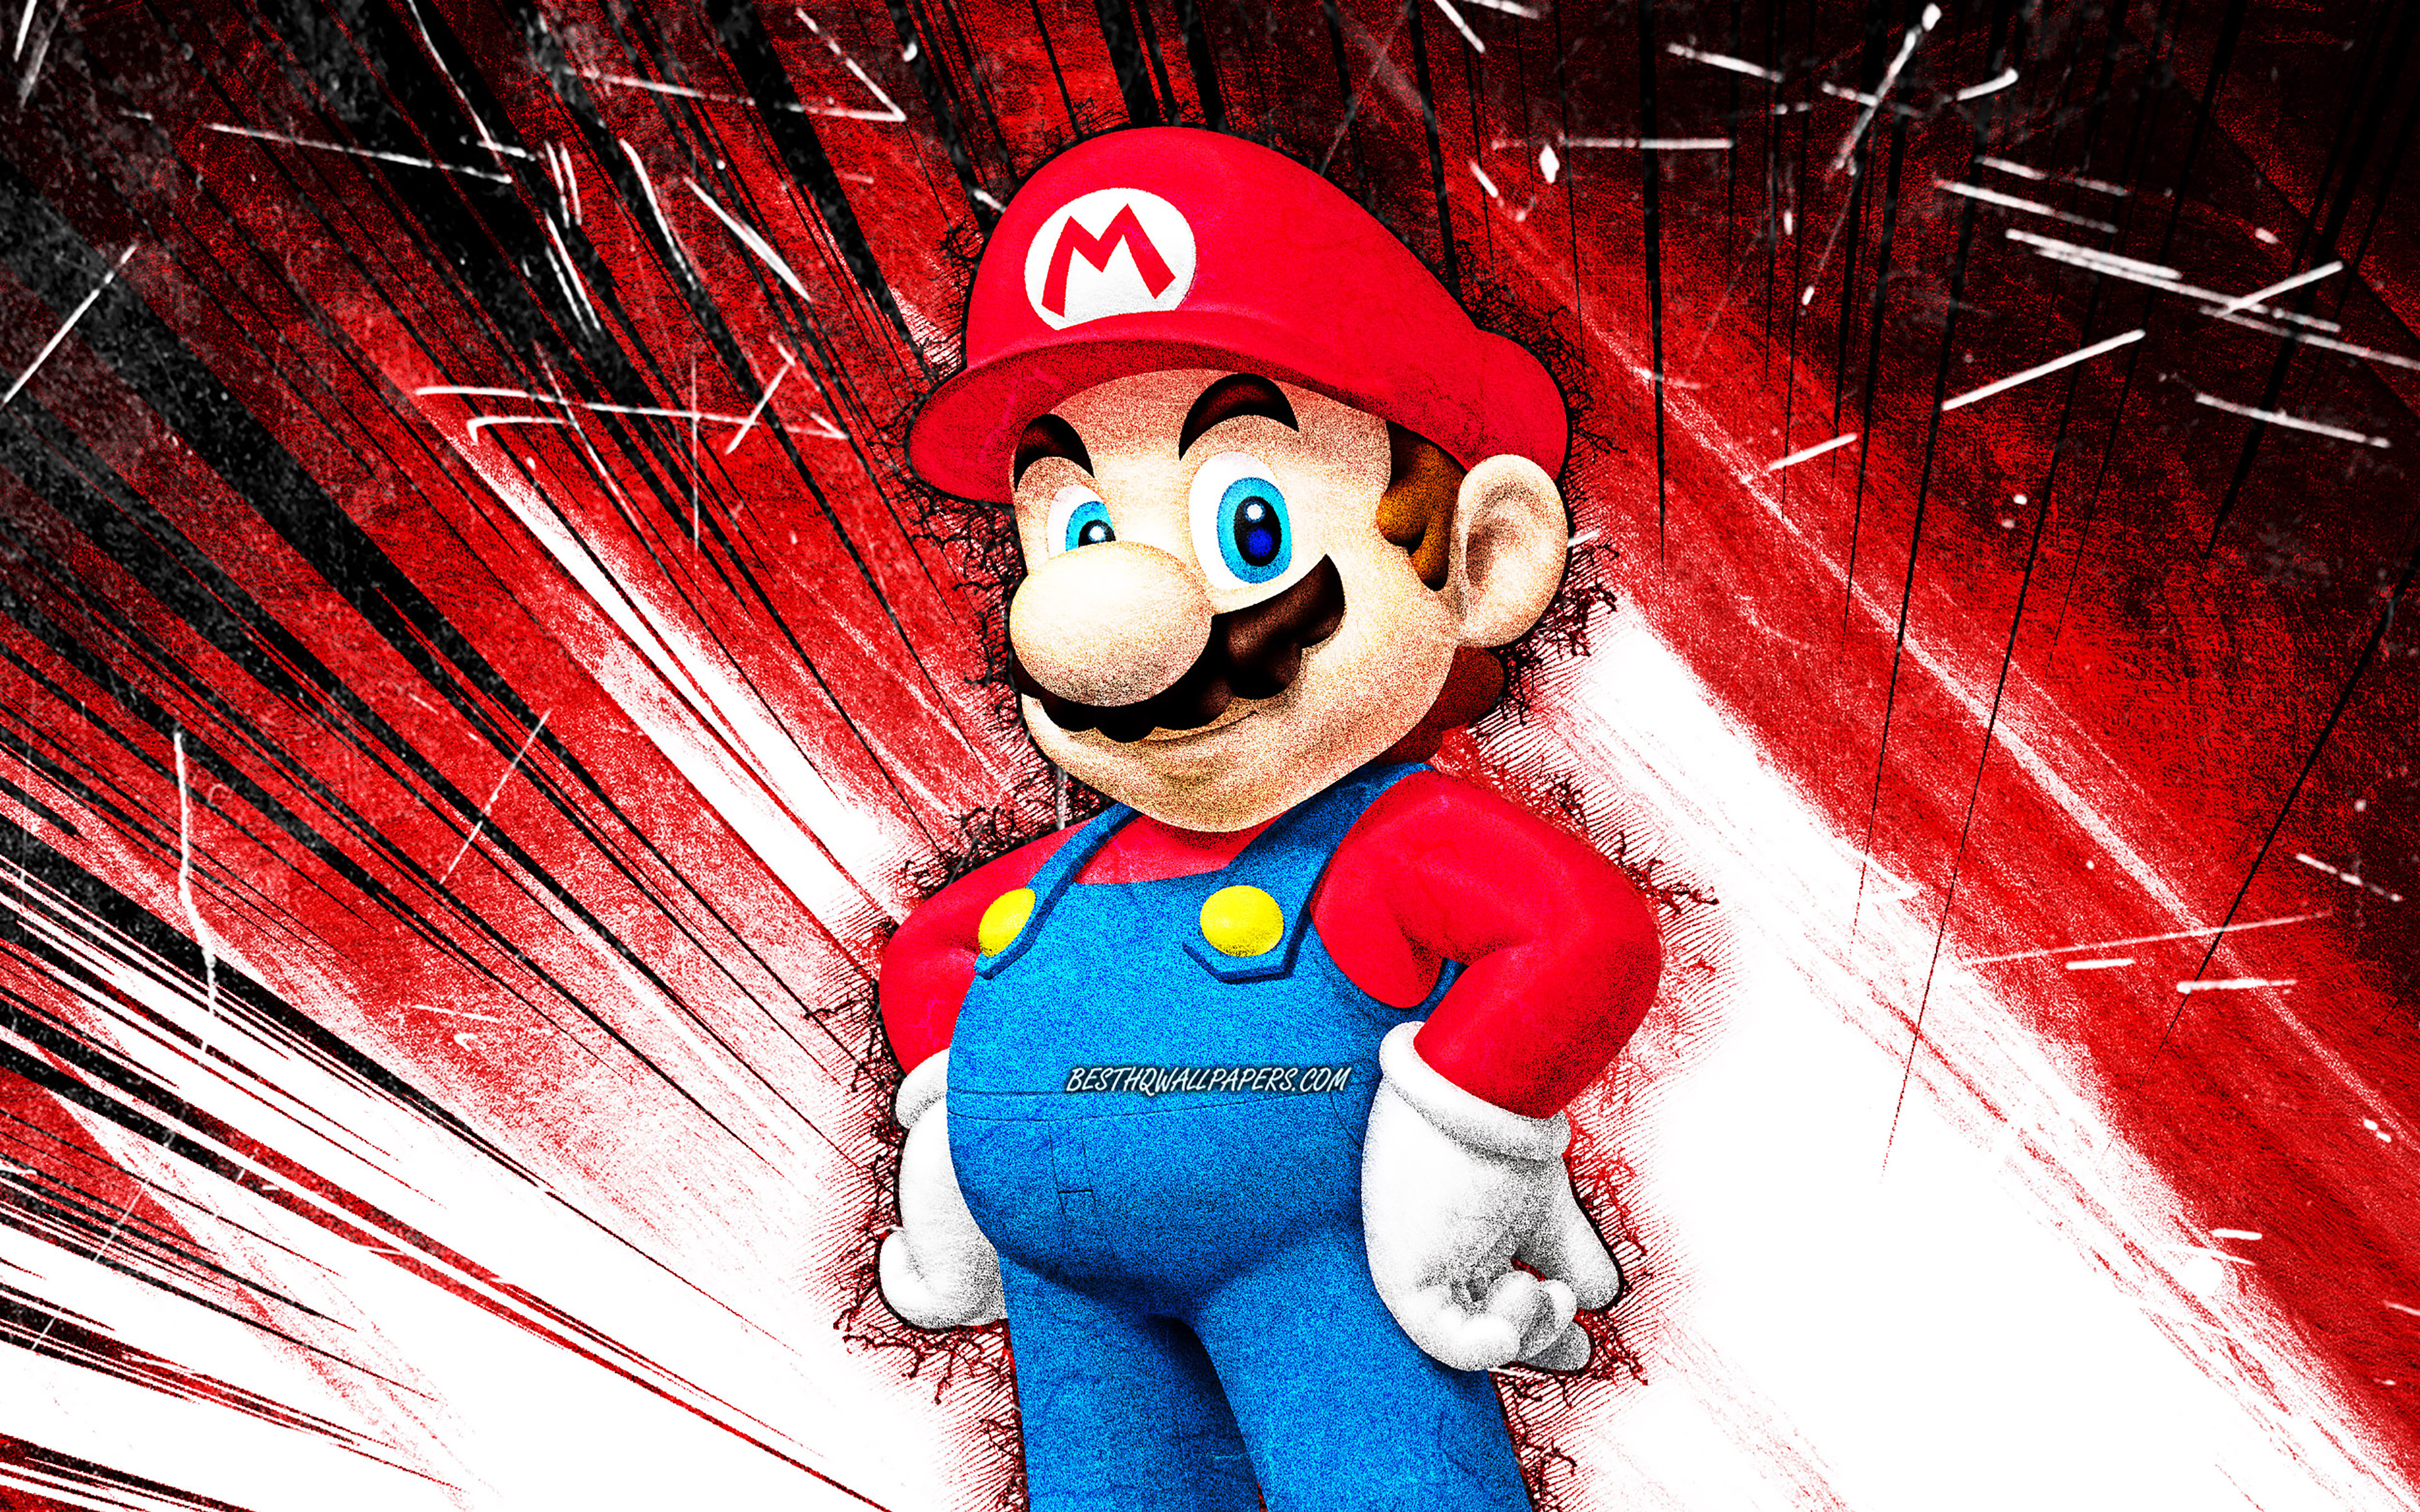 Download wallpaper 4k, Mario, grunge art, cartoon plumber, Super Mario, red abstract rays, Super Mario characters, Super Mario Bros, Mario Super Mario for desktop with resolution 3840x2400. High Quality HD picture wallpaper